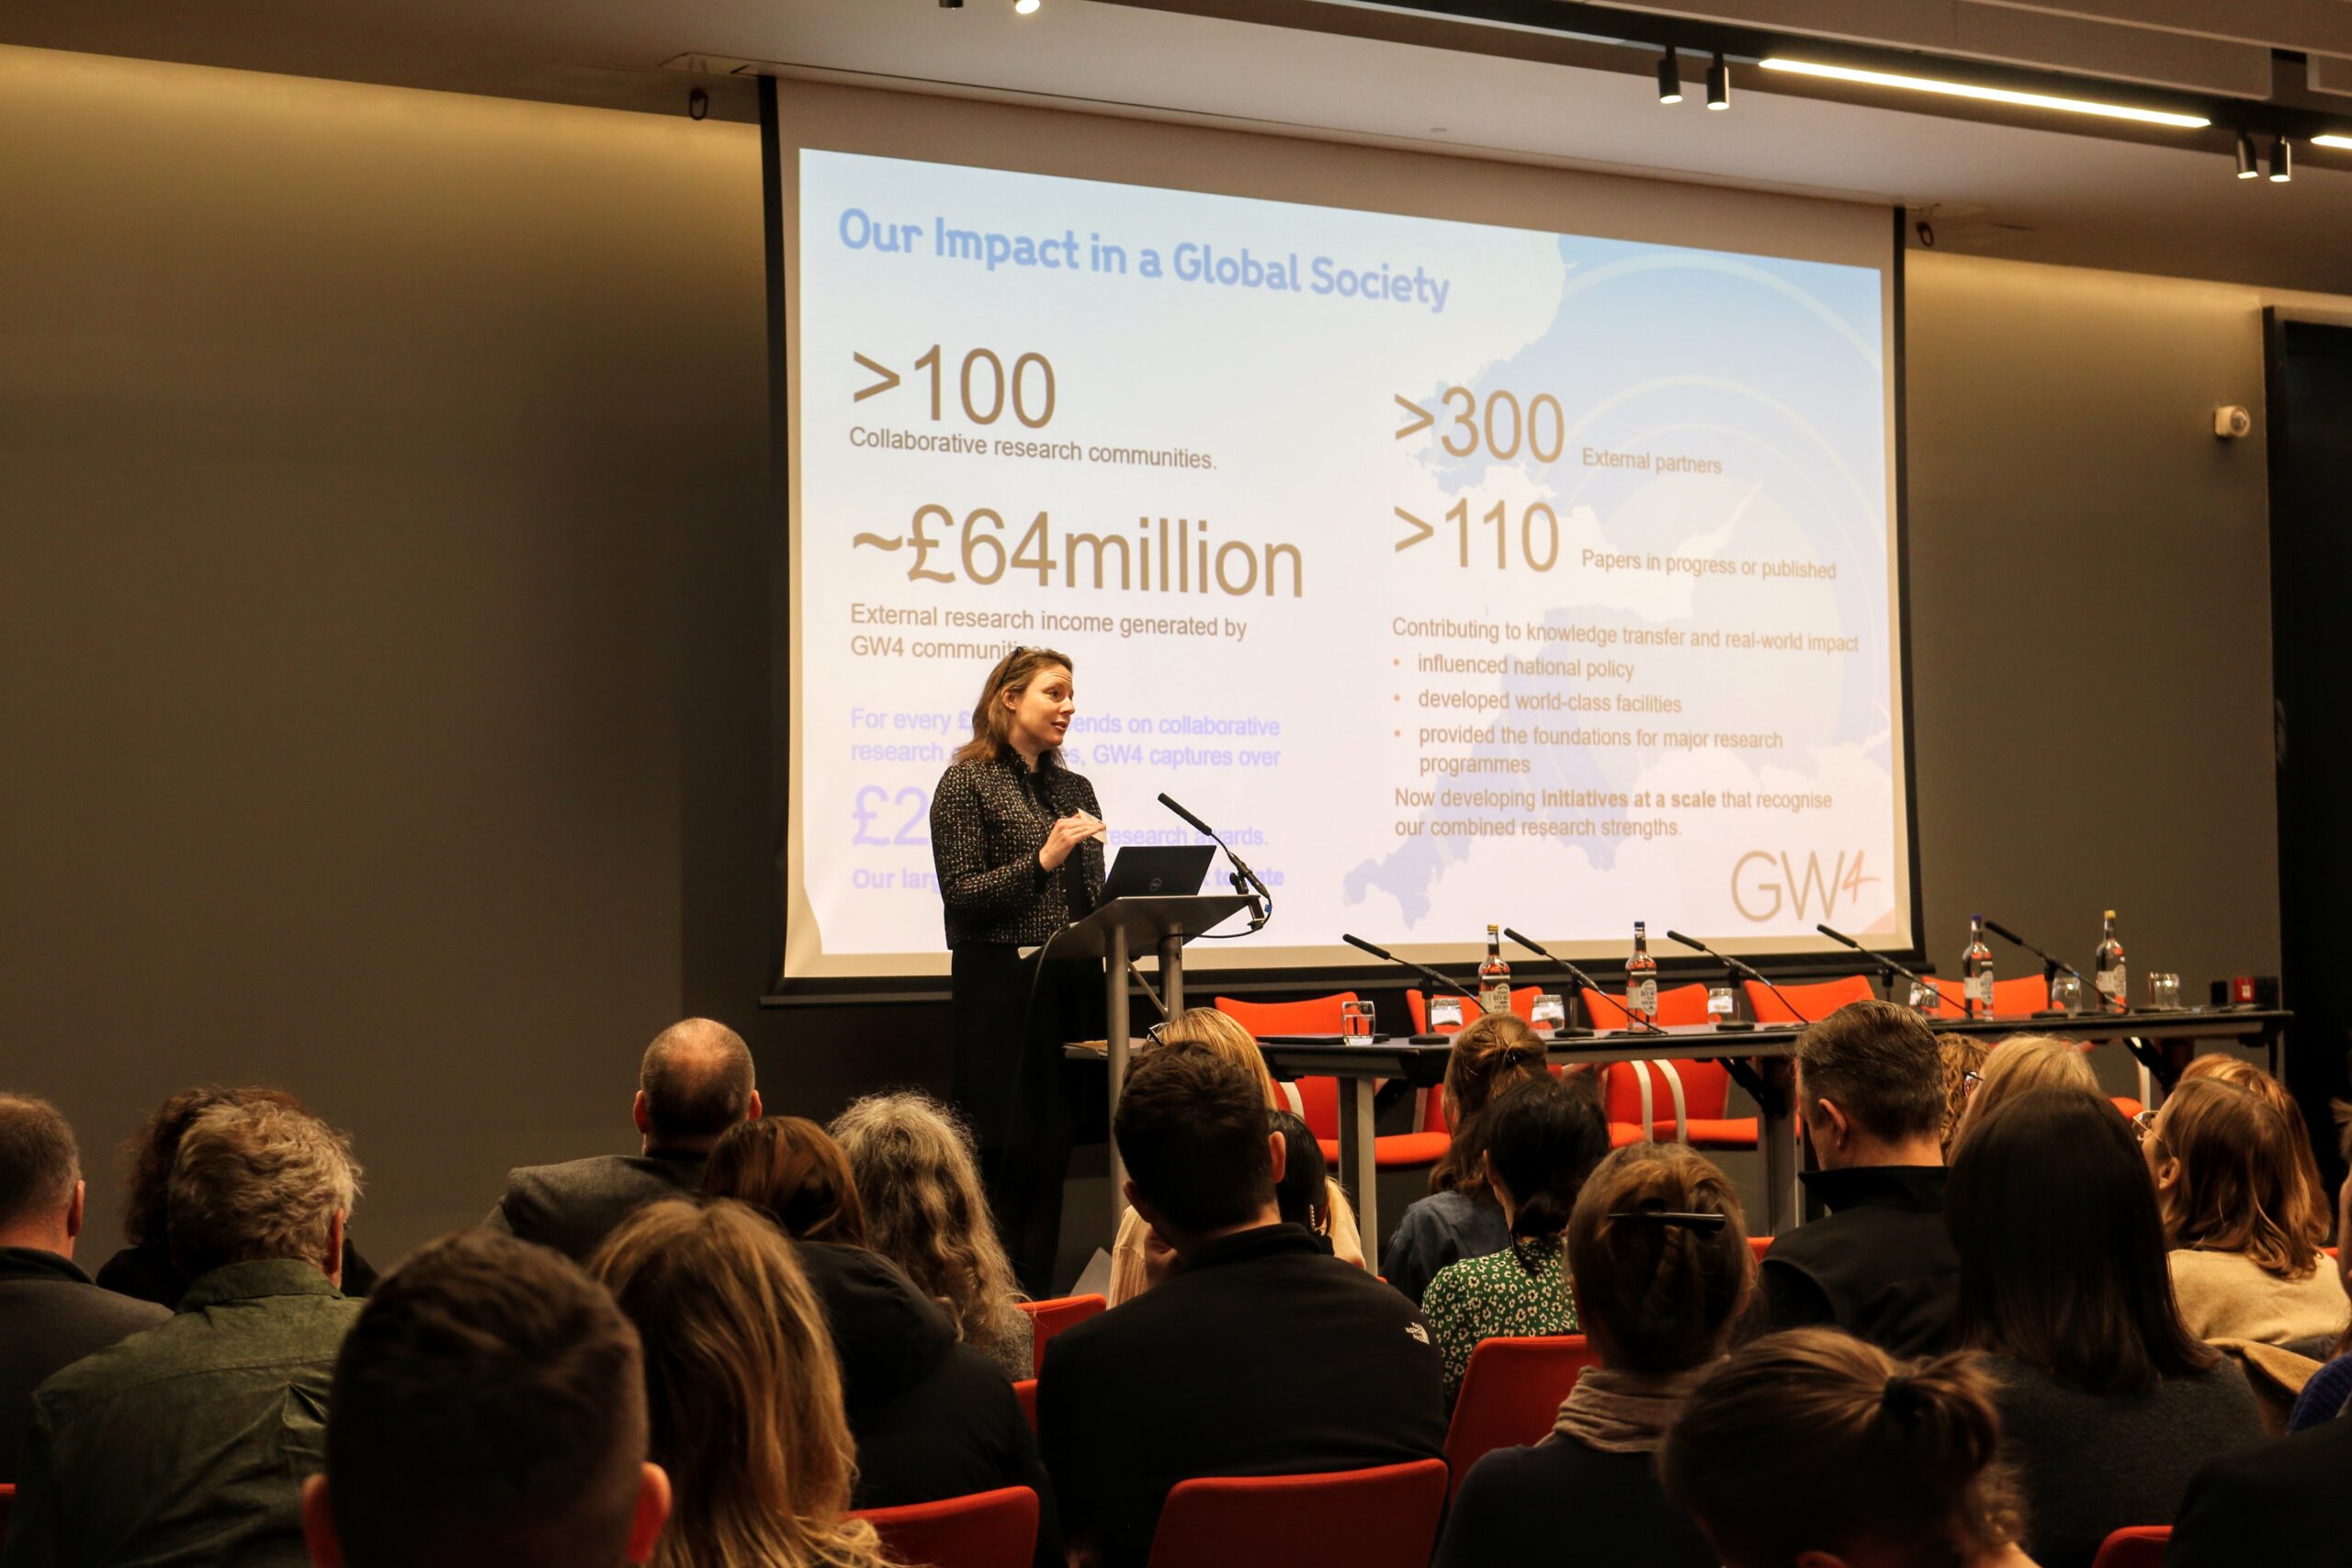 GW4 Alliance Director gives presentation highlighting global impact of GW4 at Wellcome Event